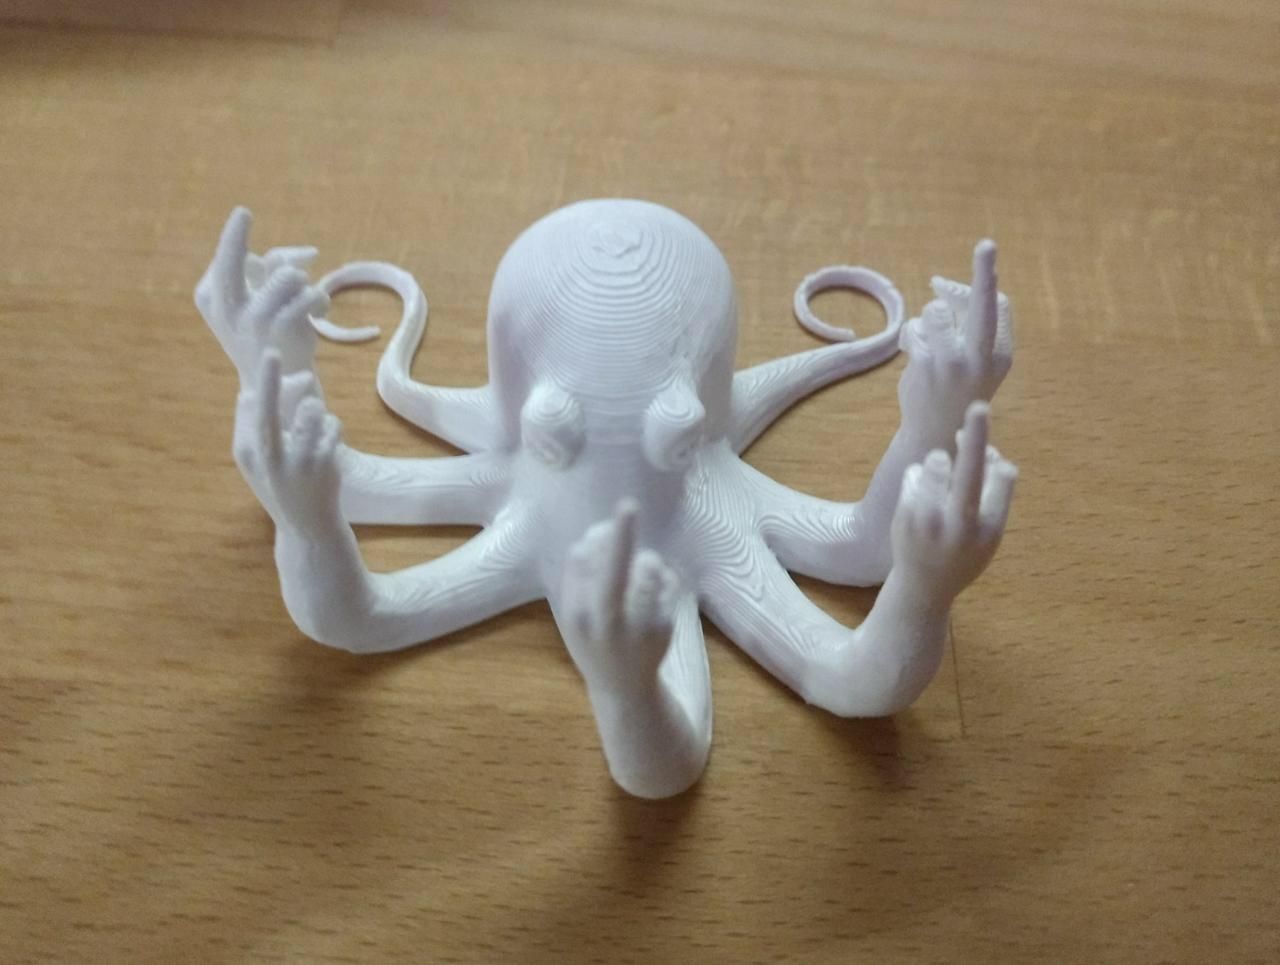 A friend made a wise choice 3D printing this masterpiece